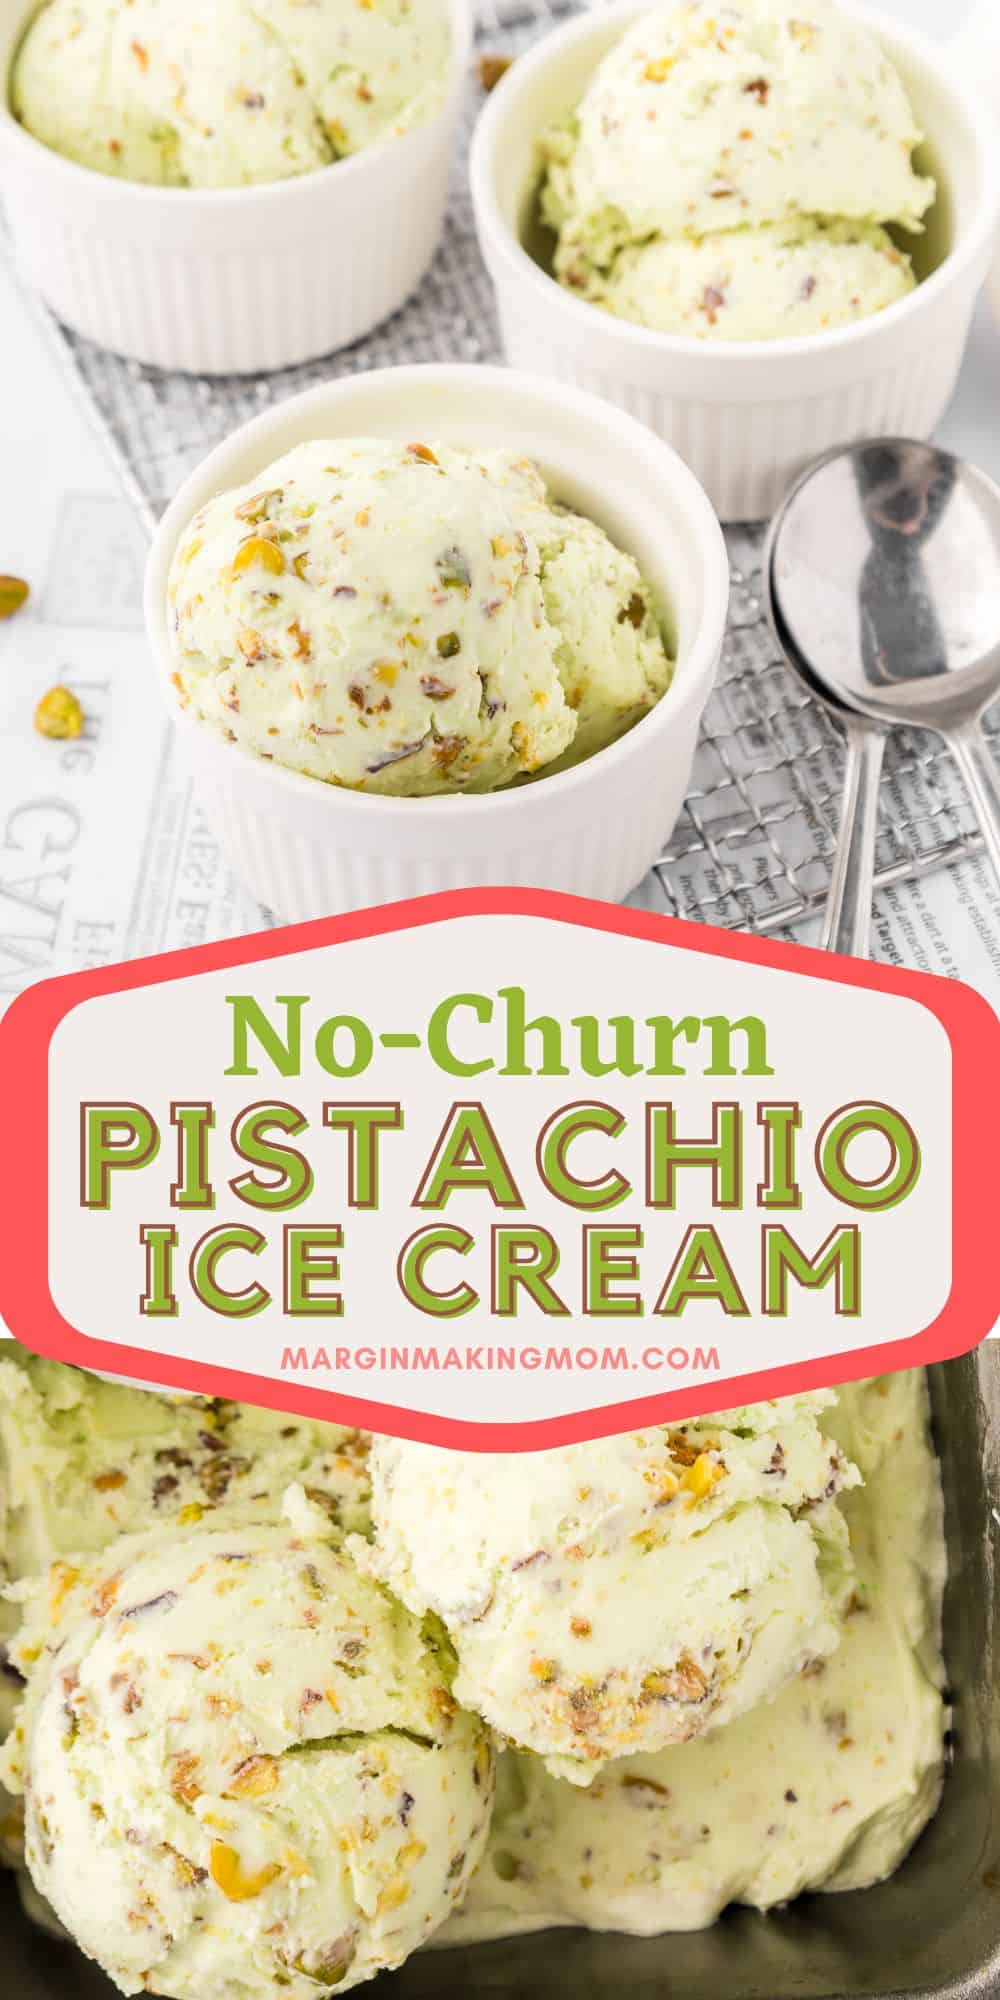 two photos; one shows no churn pistachio ice cream served in white dessert cups; the other shows a container of homemade pistachio ice cream.